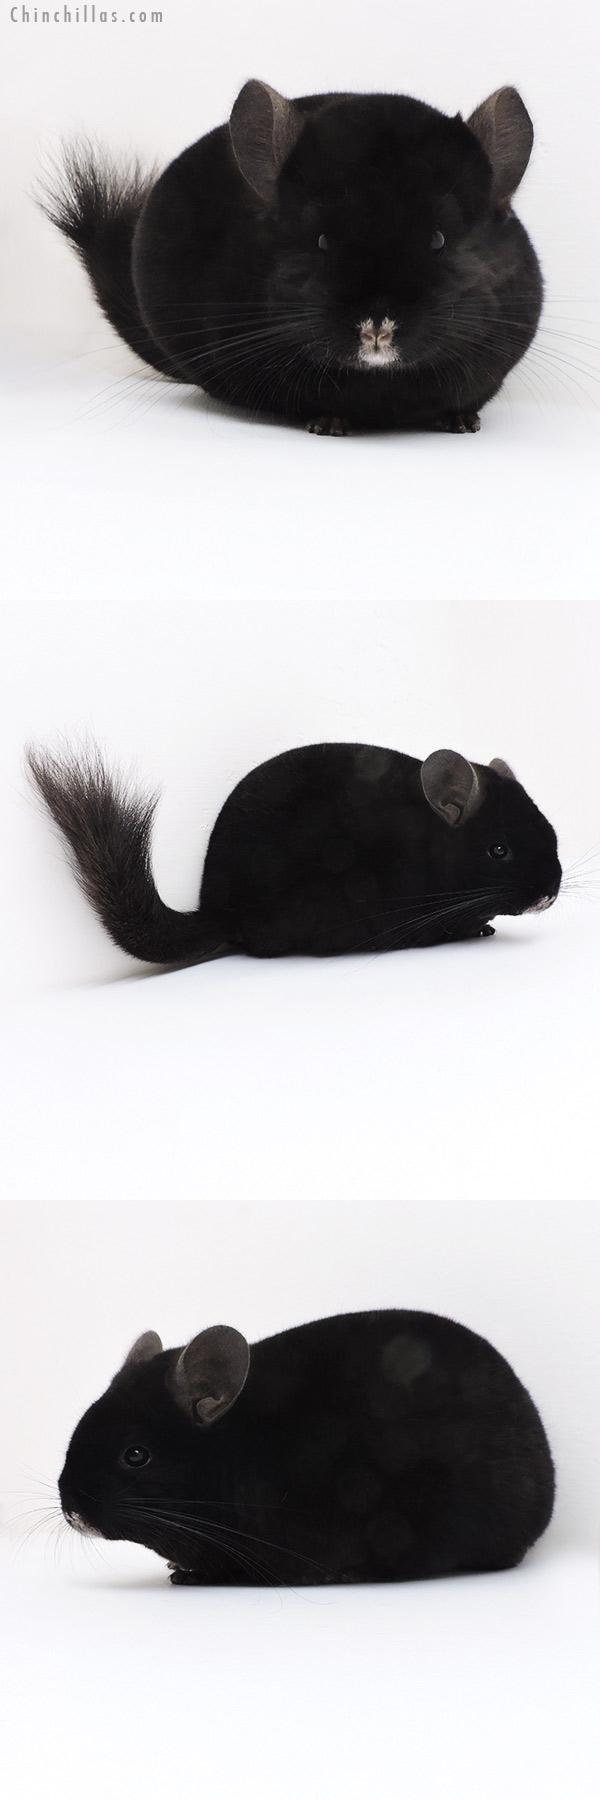 Chinchilla or related item offered for sale or export on Chinchillas.com - 17358 Show Quality Ebony Male Chinchilla